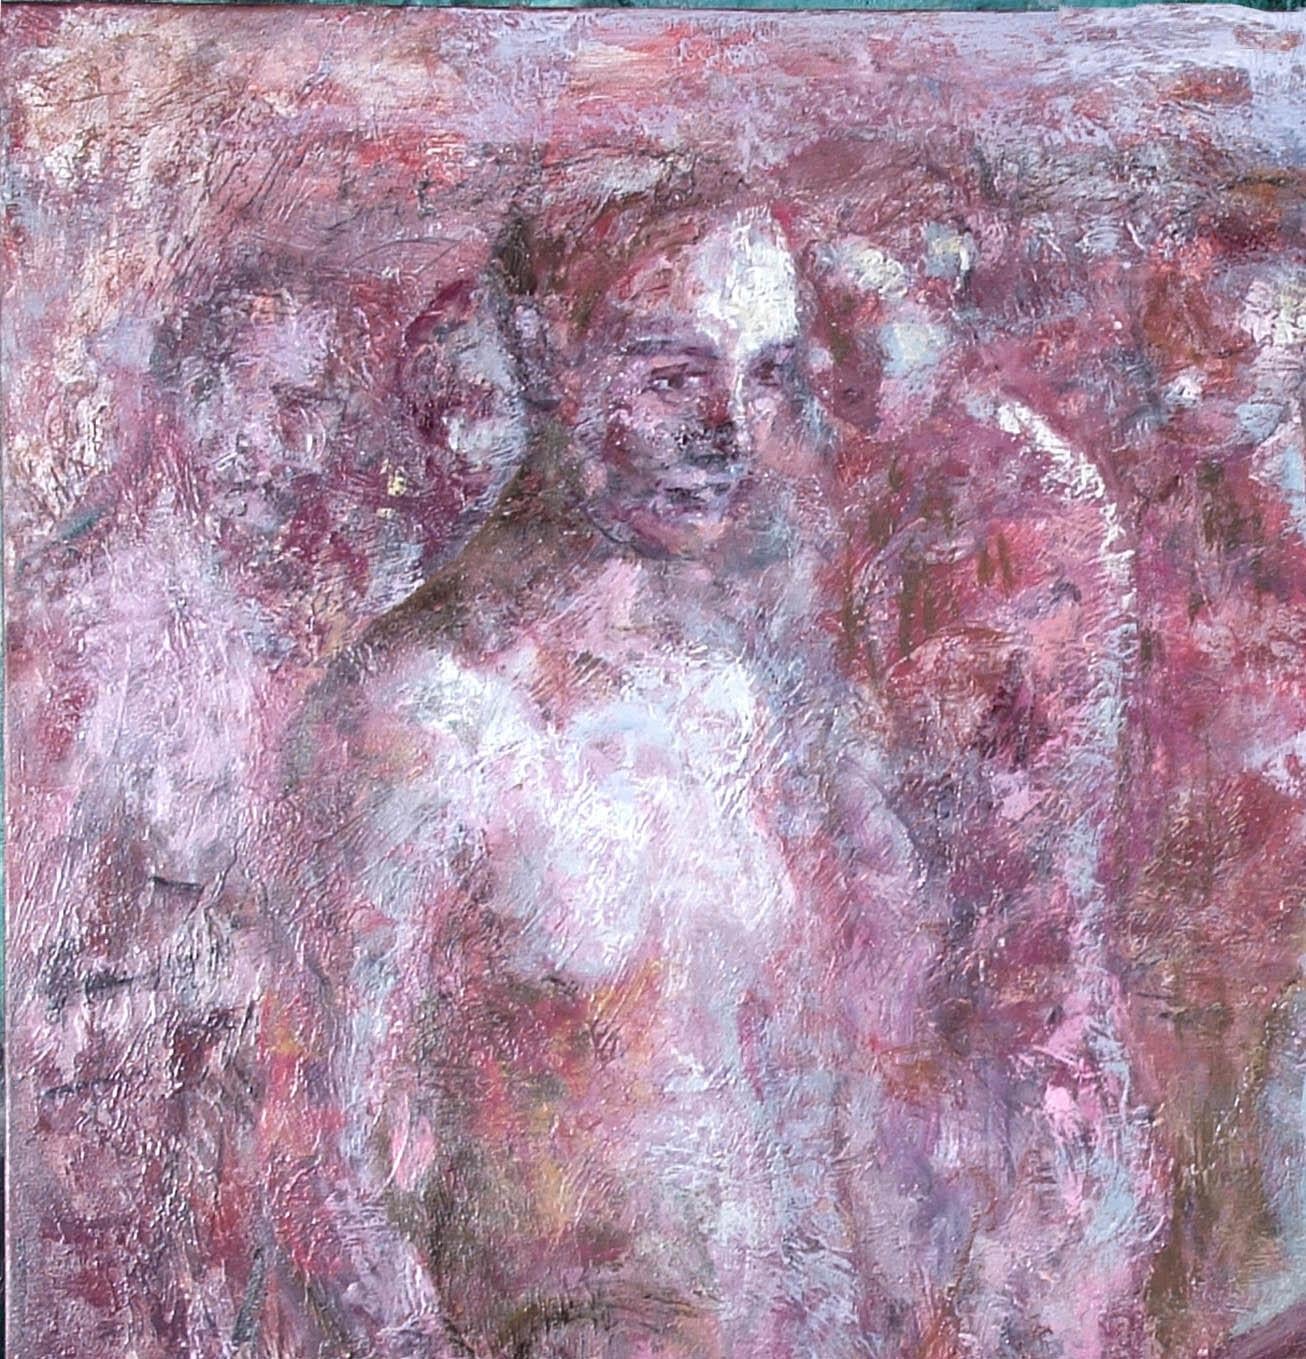 17-4-08 Diptych - 21st Century, Contemporary, Nude Painting, Oil on Canvas 1